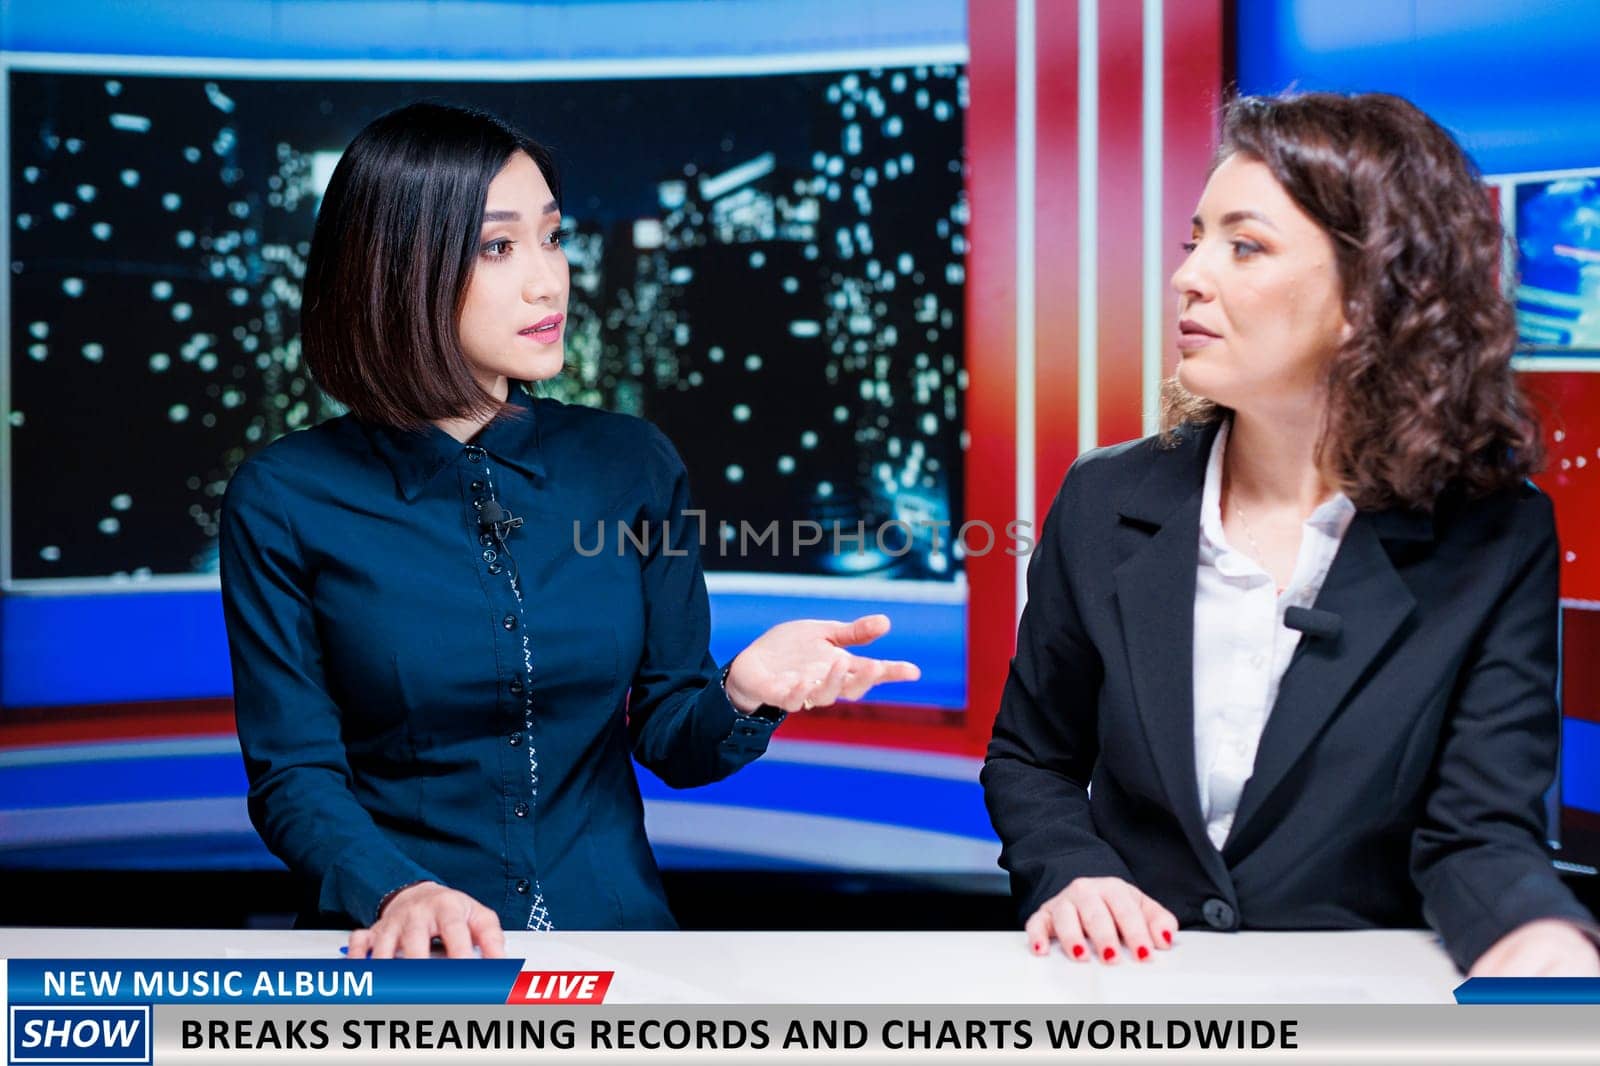 Journalists team talk about new music album, women night show hosts reveal song breaking top charts and records at global scale. Newscasters discuss about streaming and selling success.